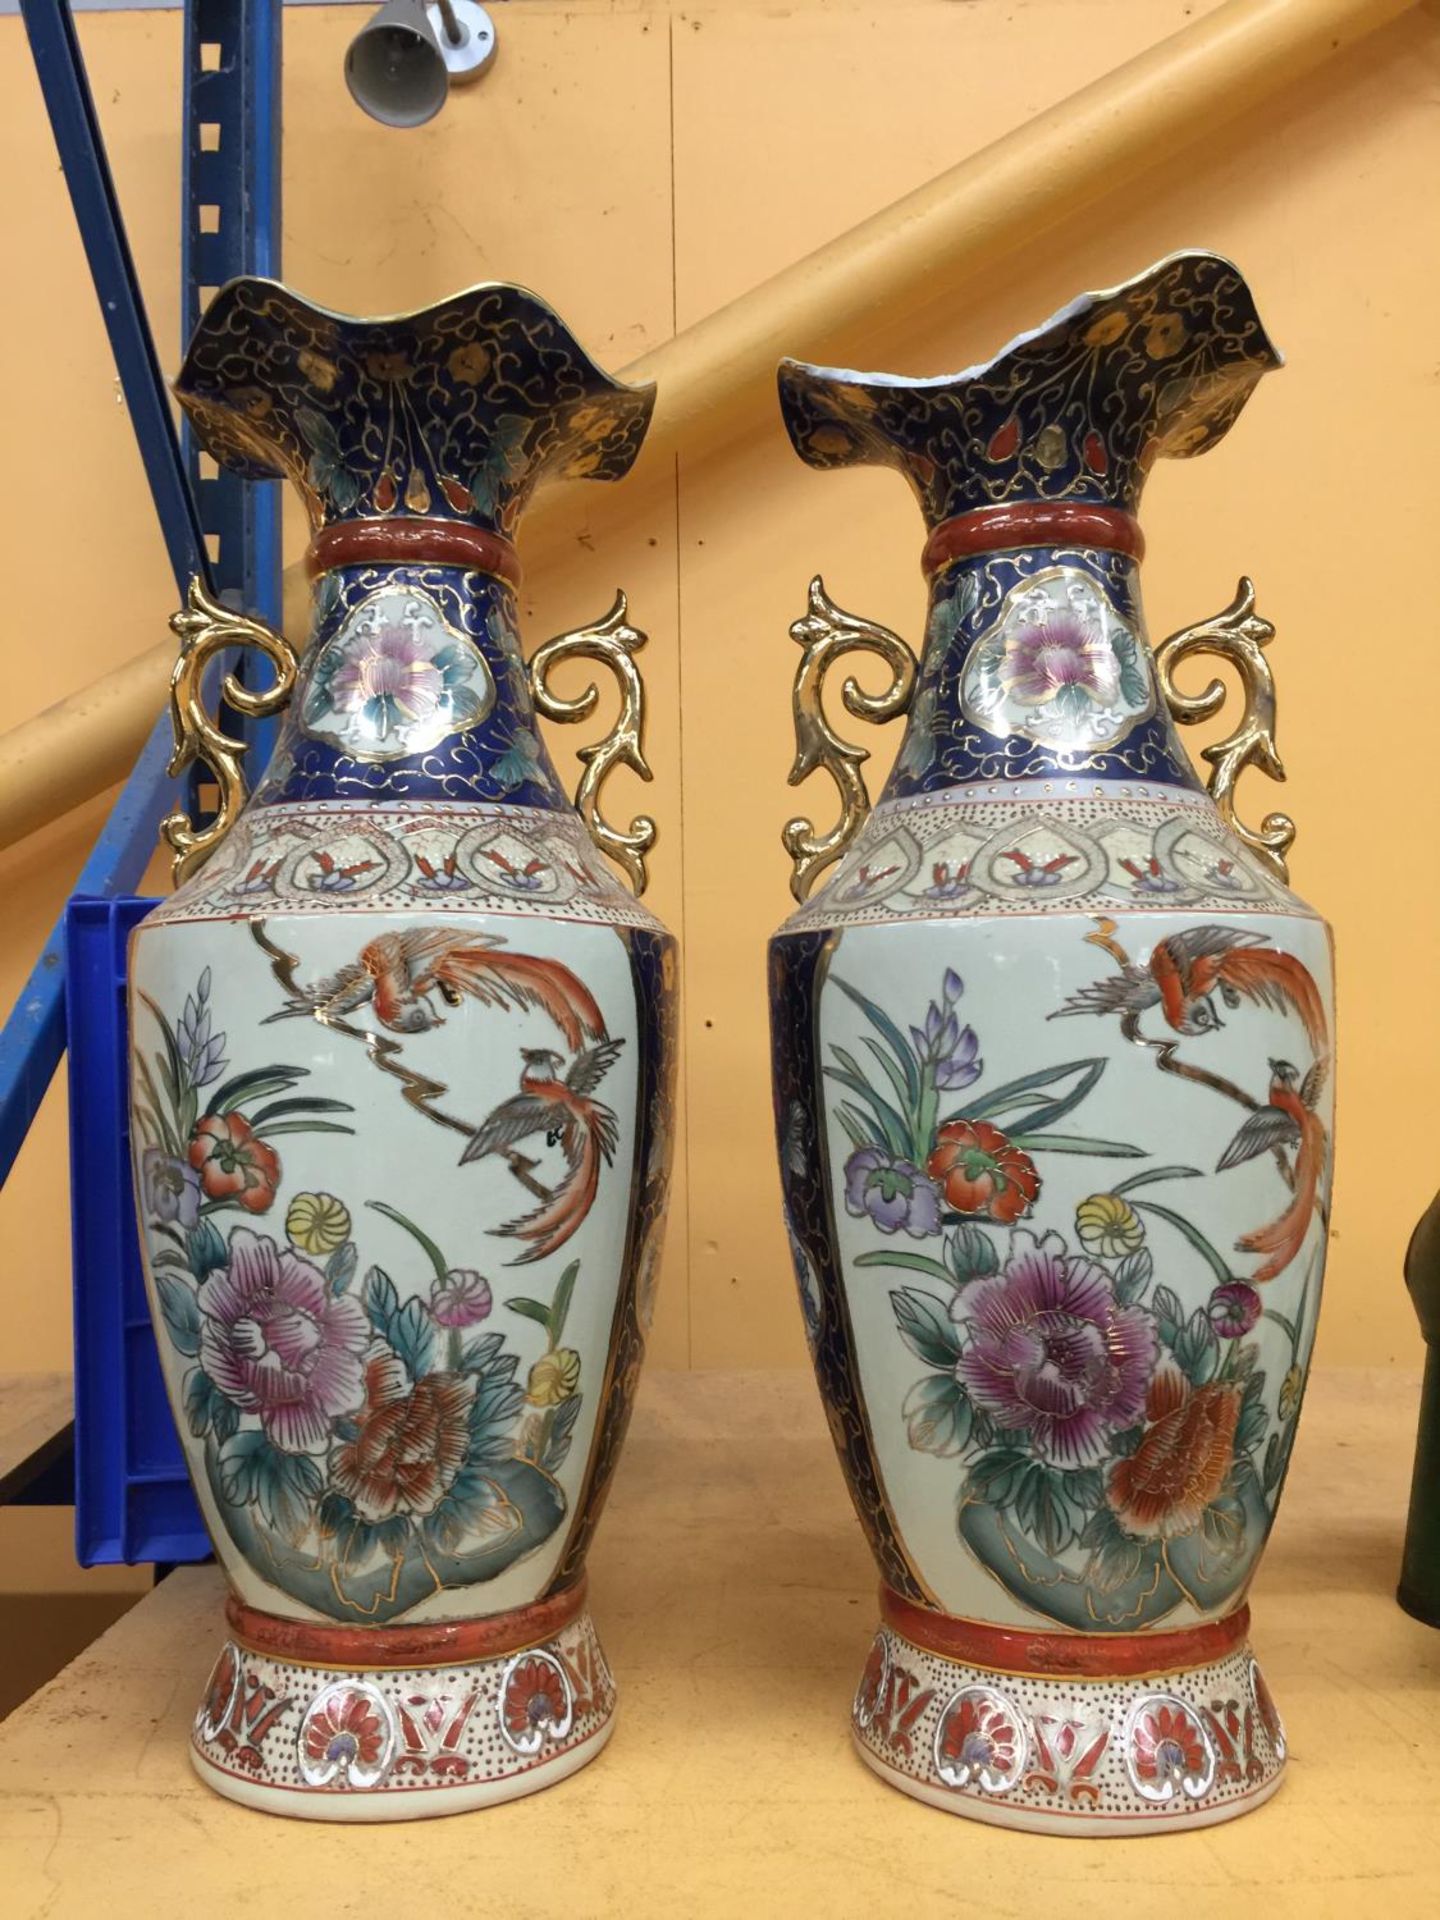 TWO LARGE ORIENTAL VASES WITH CLOISONNE DECORATION OF CHRYSANTHEMUMS, BIRDS, ETC HEIGHT 61CM - ONE